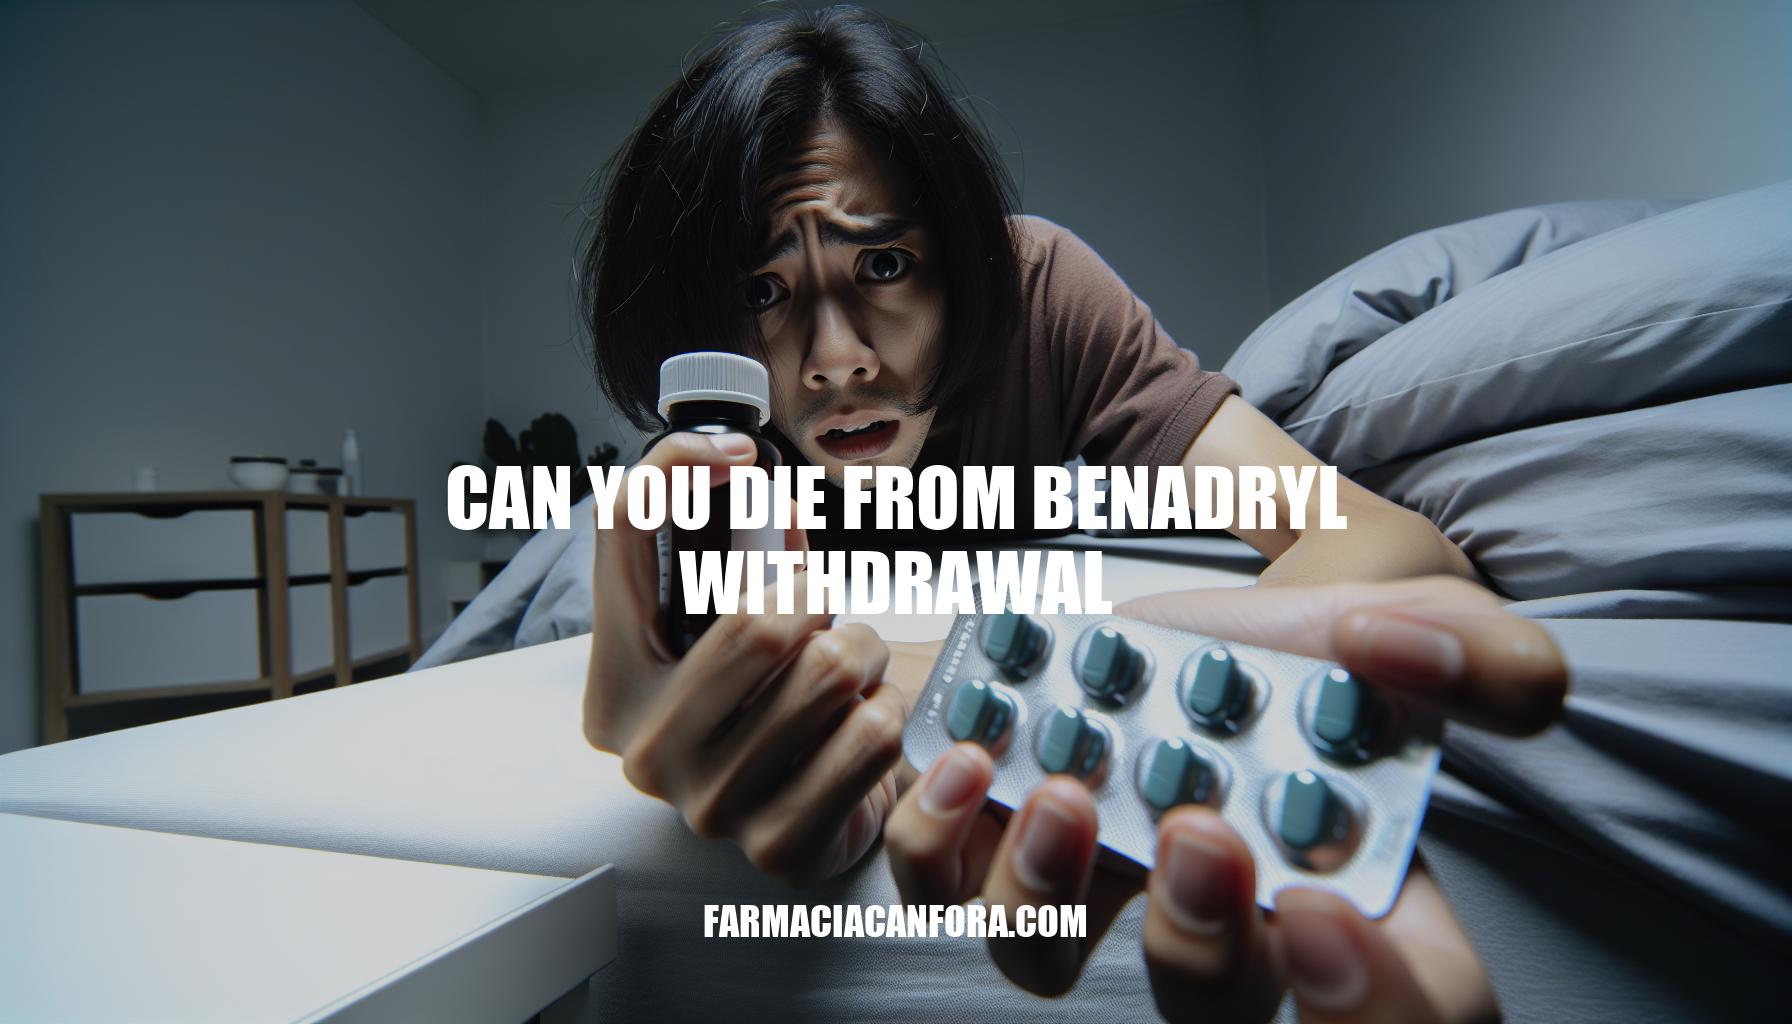 Can You Die From Benadryl Withdrawal: Risks and Help